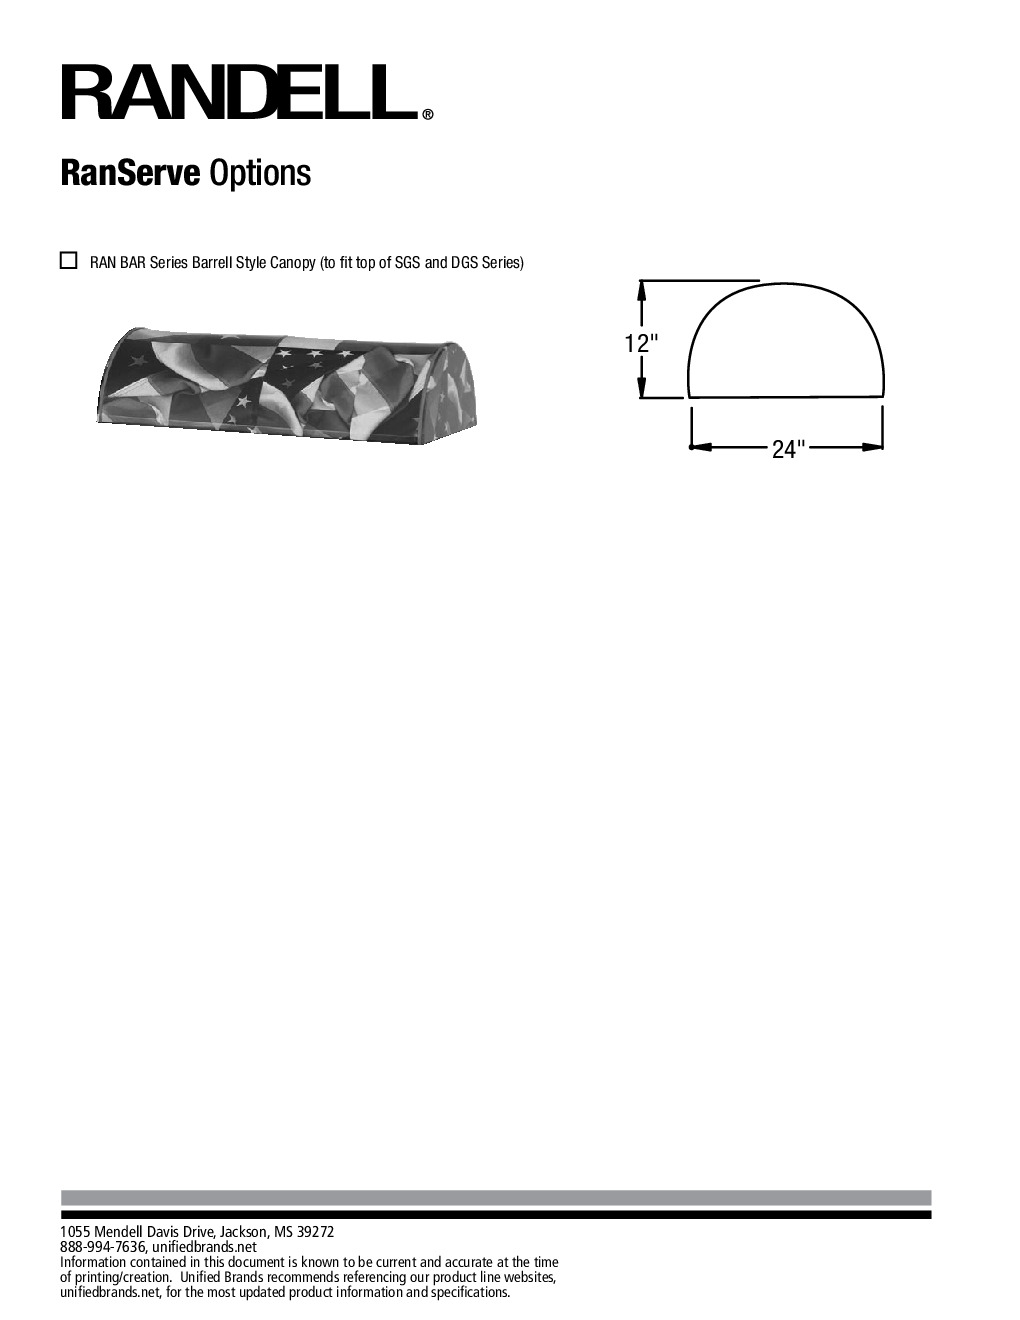 Randell RAN CP48-SS Counter Protector, for 48